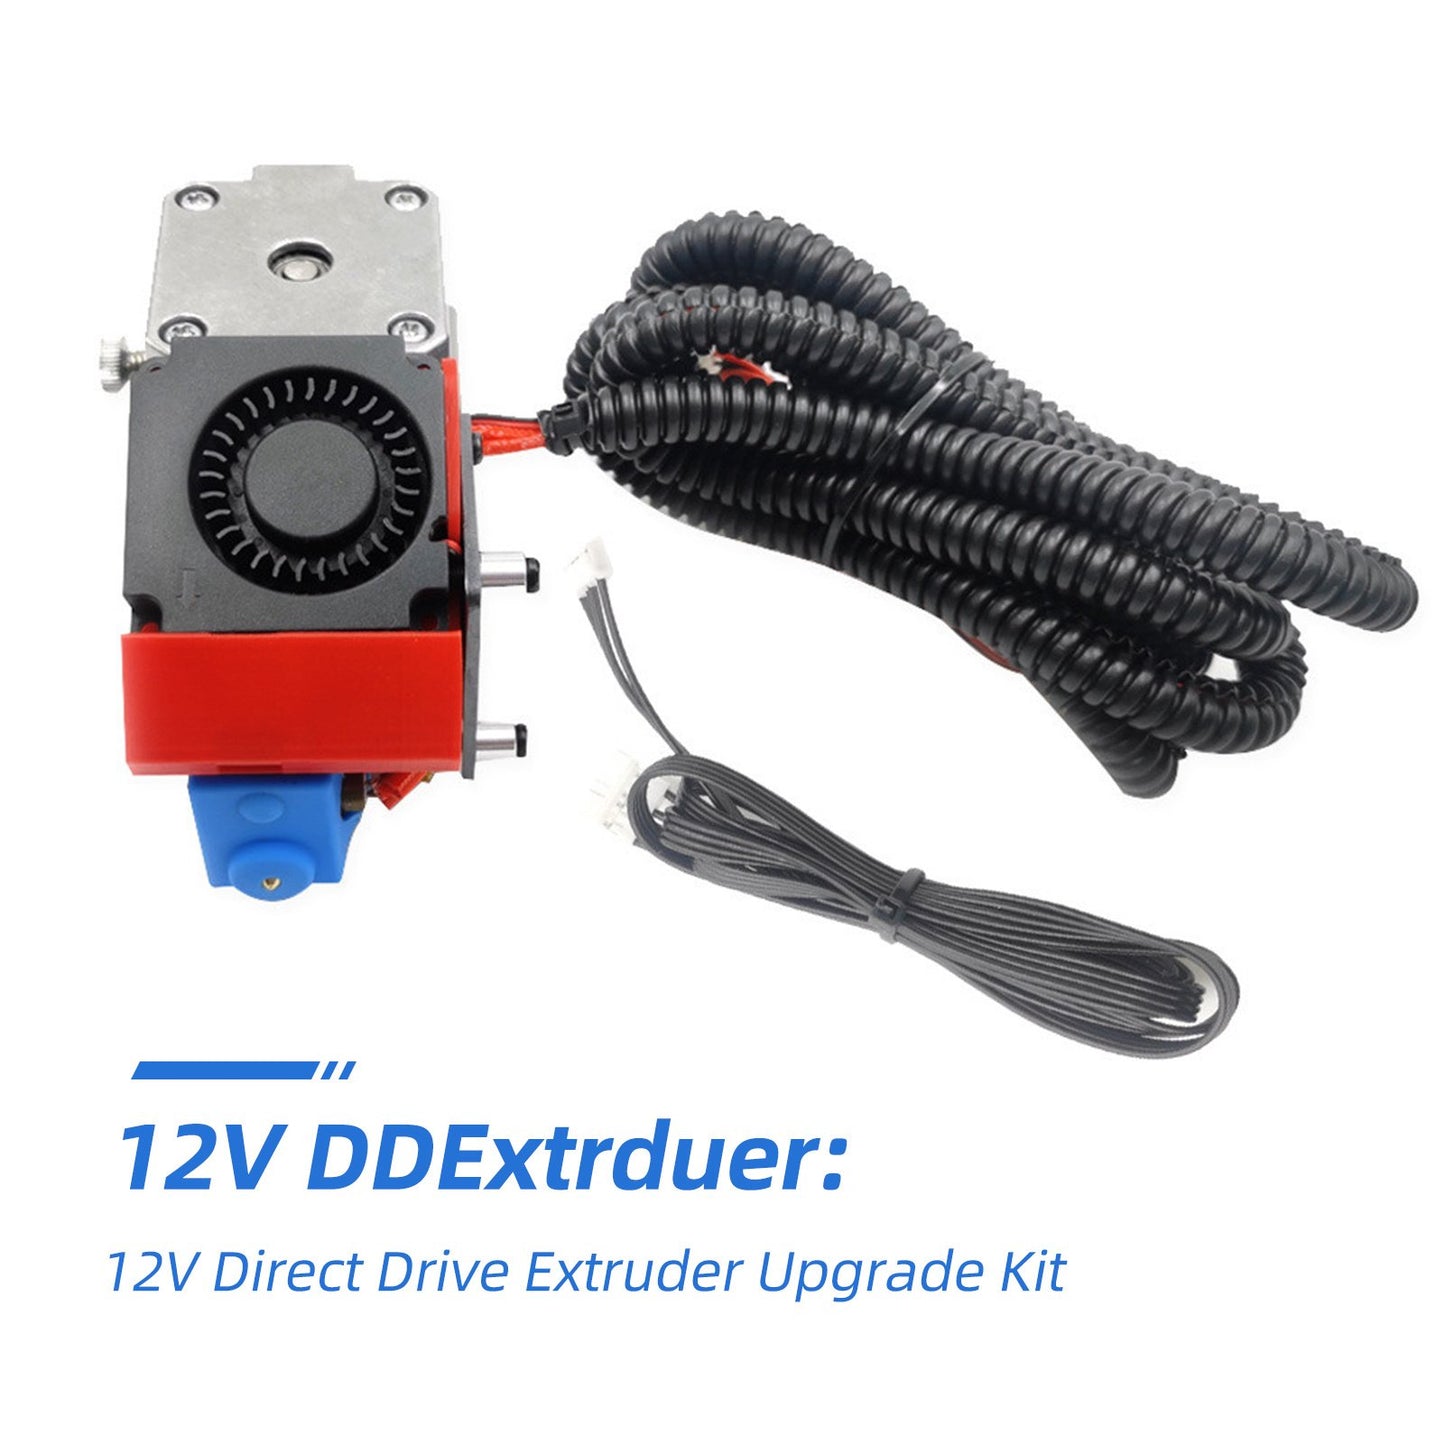 Direct Drive Extruder Upgrade Kit for ZONESTAR 3D Printer Performance Improvement Support TPU and